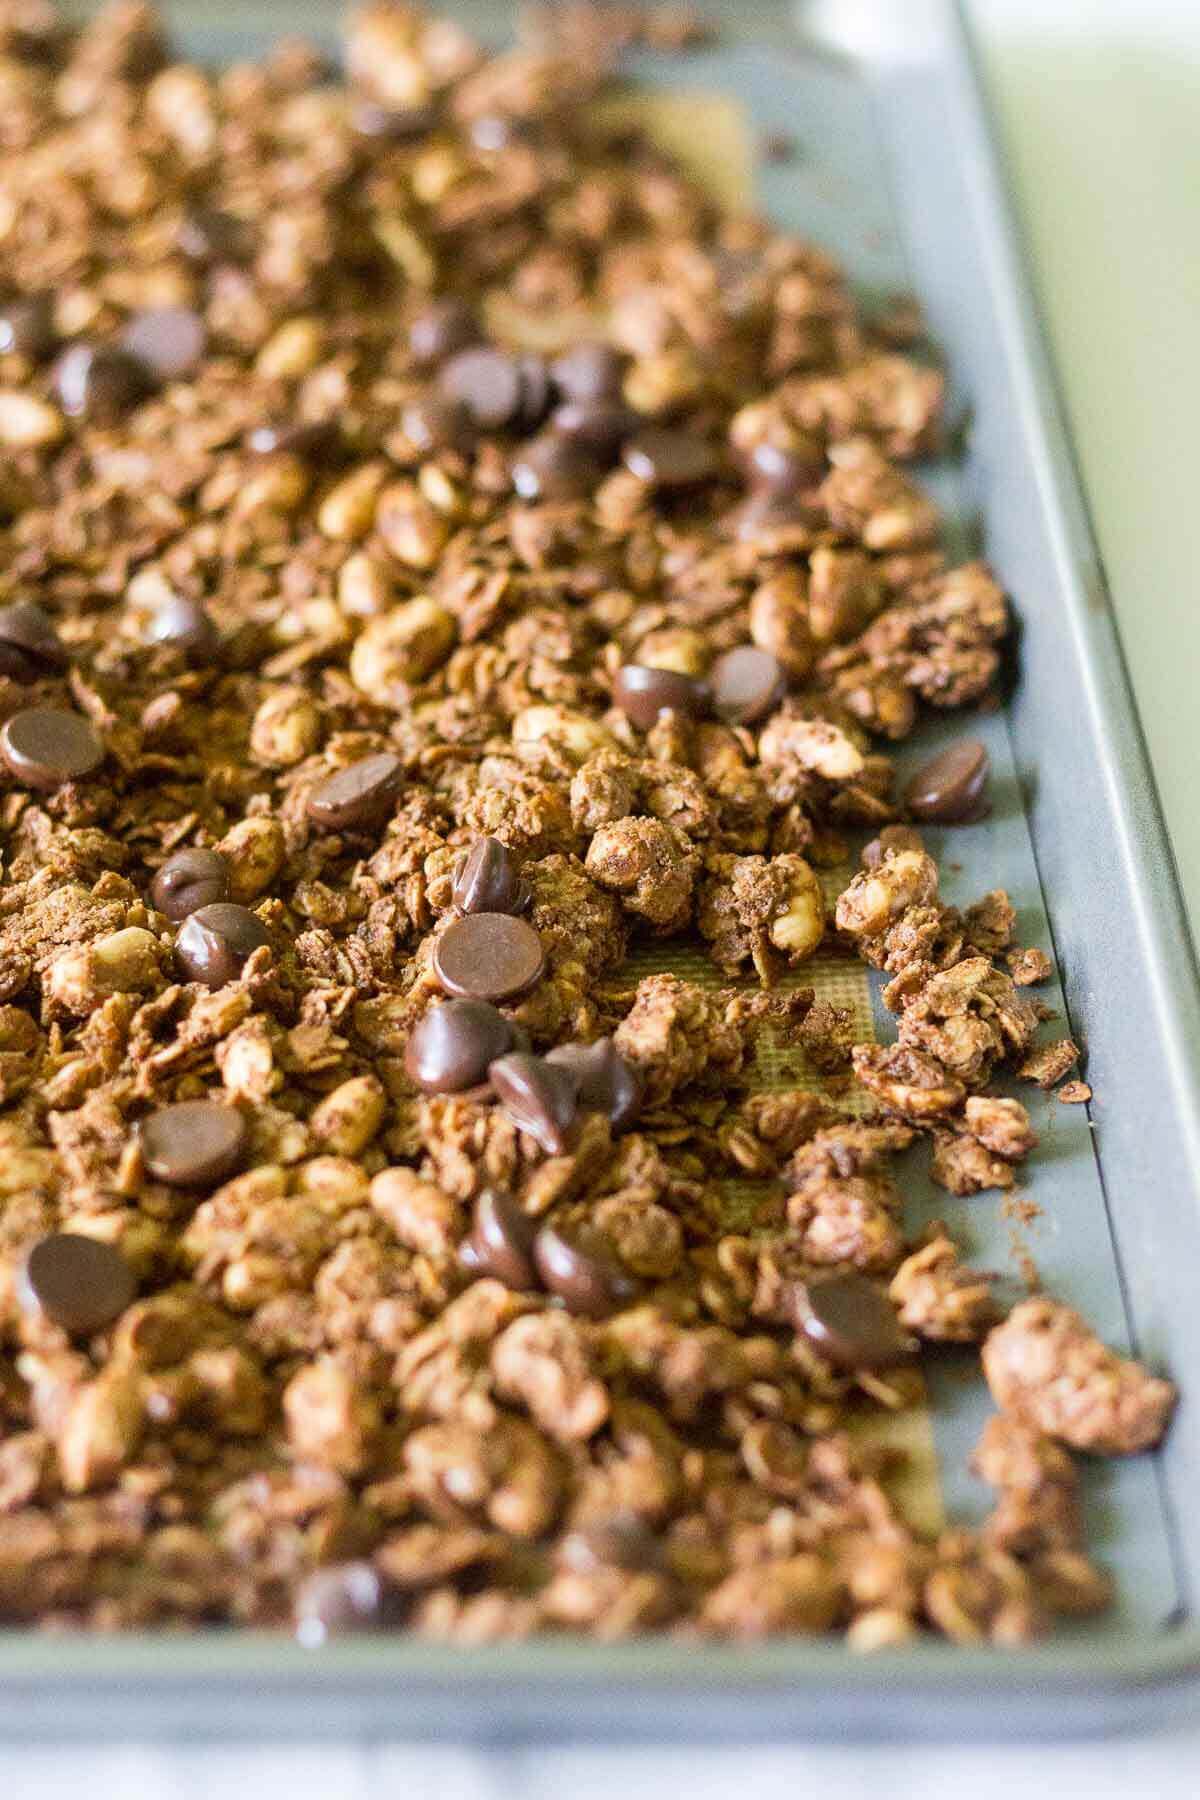 This Chocolate Peanut Butter Protein Granola is crunchy, flavorful and packed with healthy ingredients. It's a delicious way to start the day! The perfect breakfast recipe or snack recipe, this easy granola comes together in minutes and tastes so good.